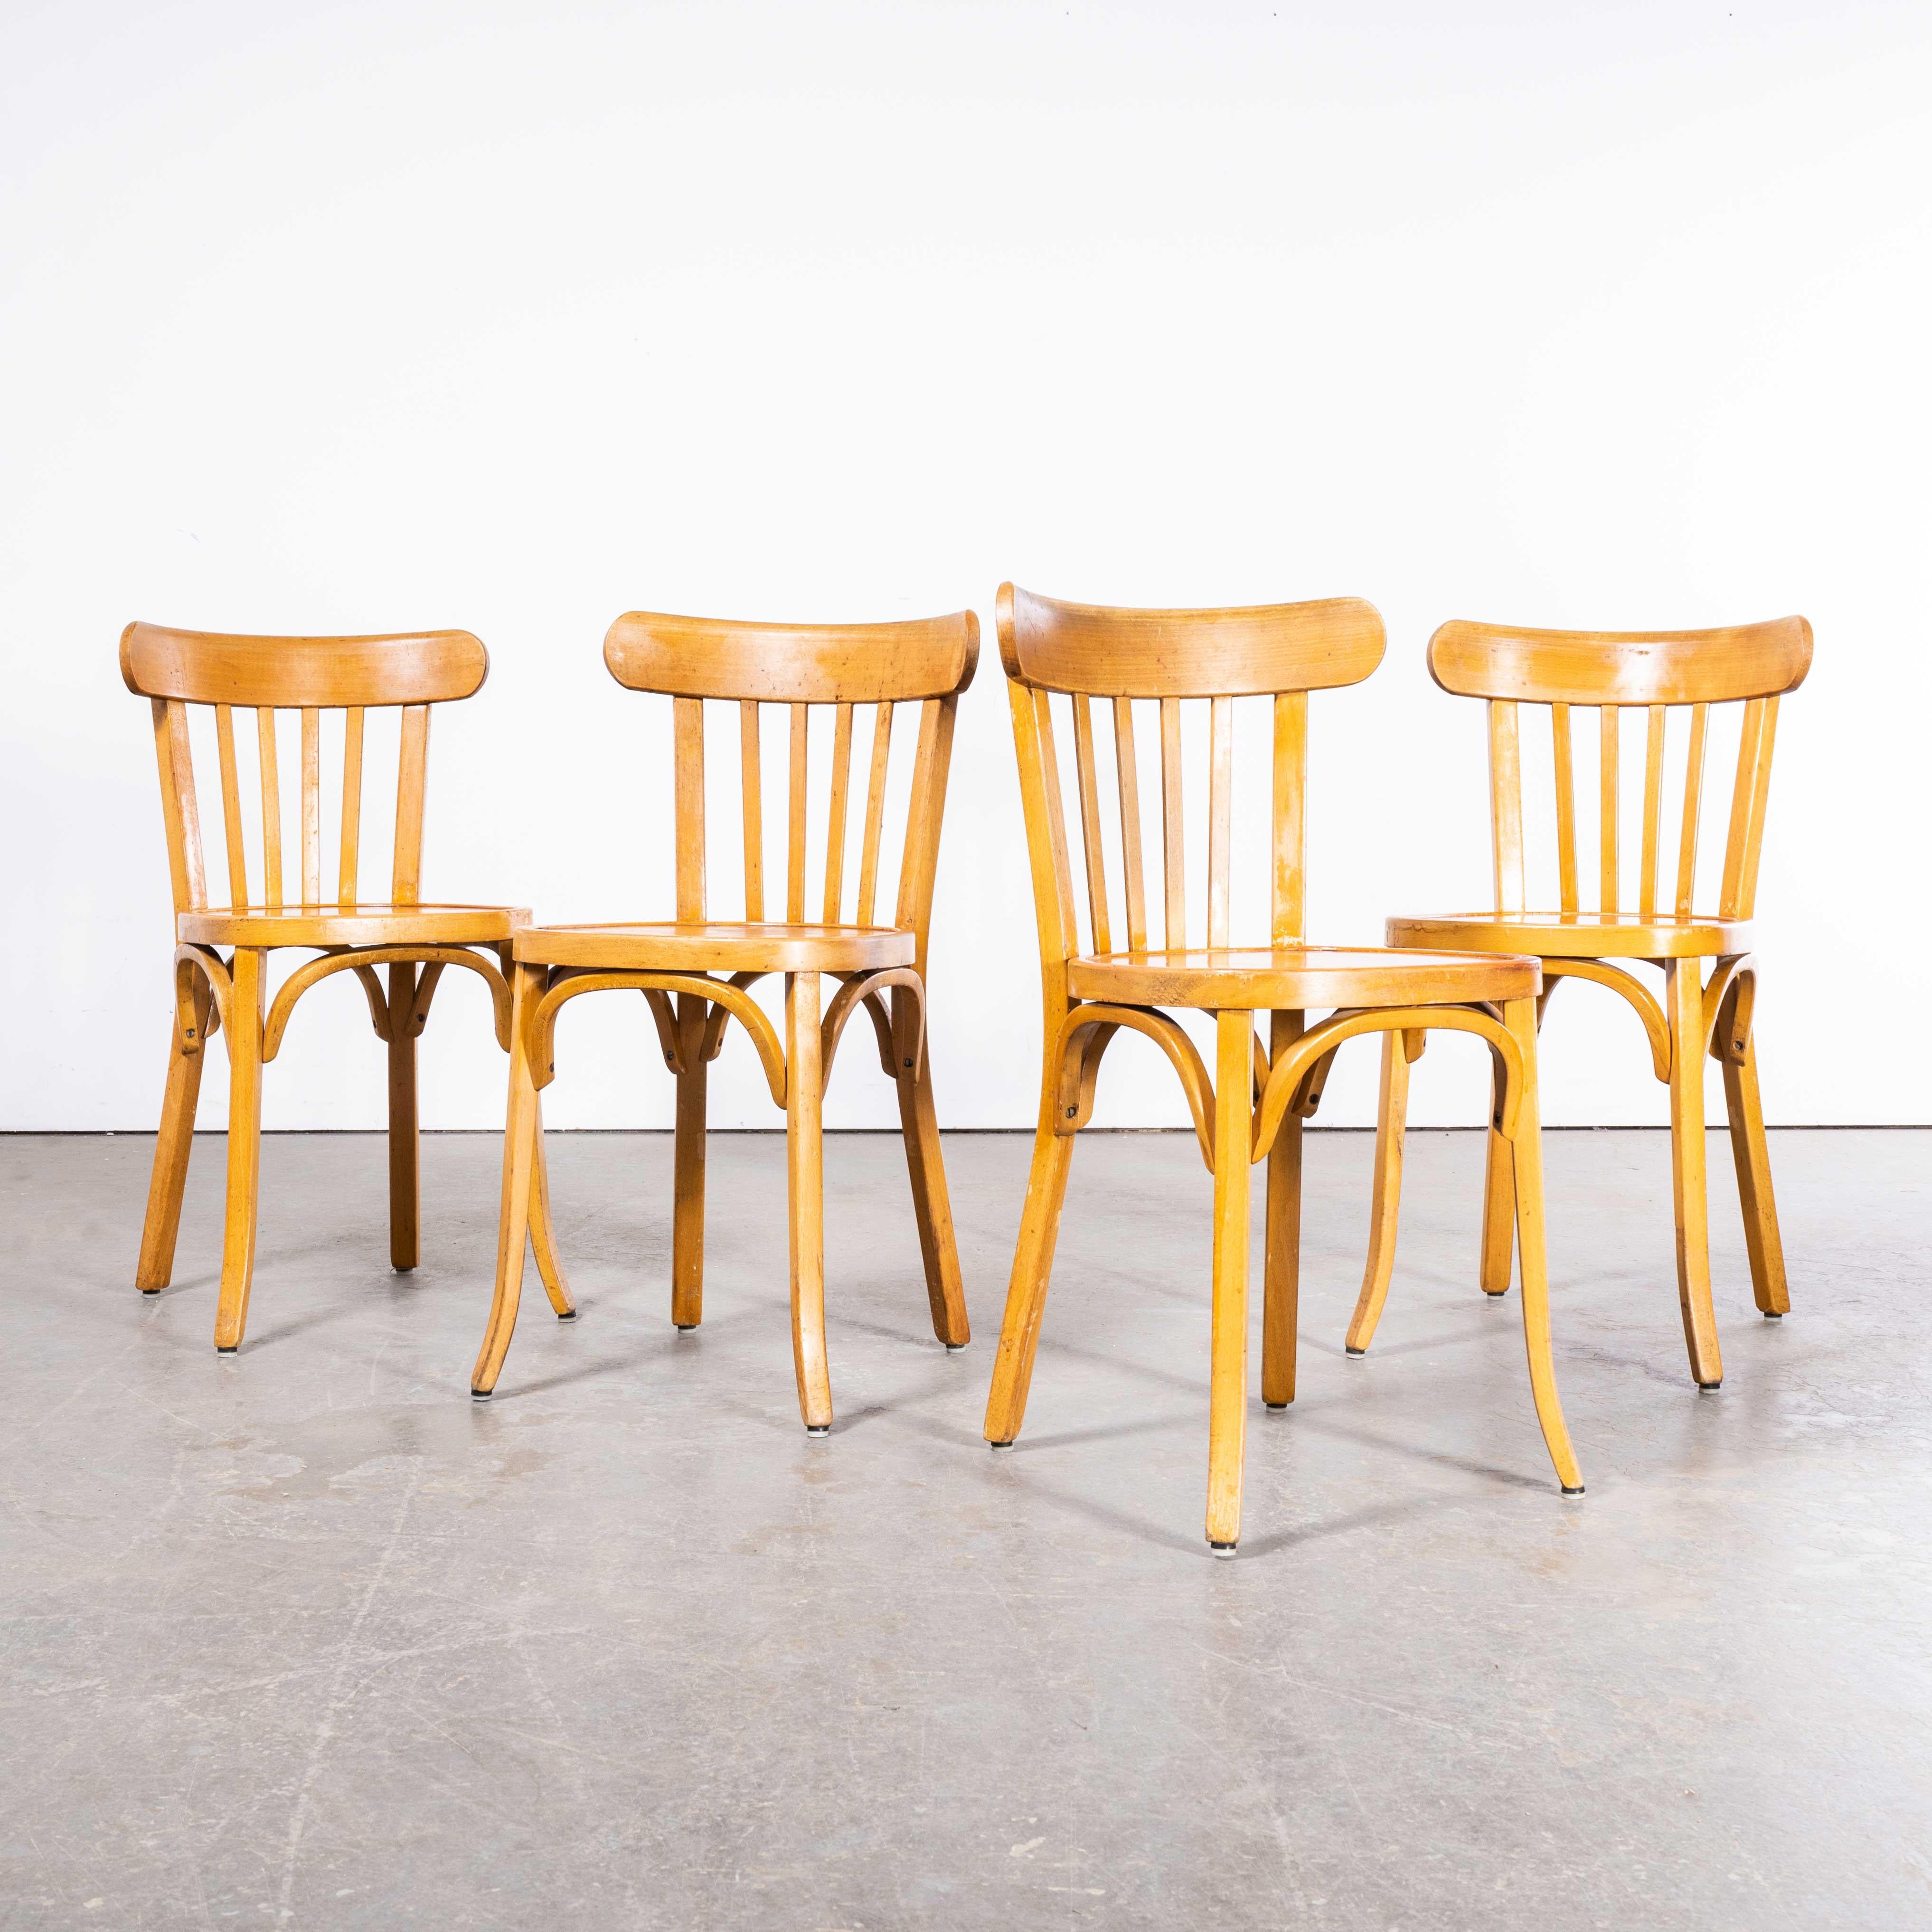 1950’s Baumann Bentwood Bistro Dining Chair – Honey – Set Of Four
1950’s Baumann Bentwood Bistro Dining Chair – Honey – Set Of Four. Classic Beech bistro chair made in France by the maker Baumann. Baumann is a slightly off the radar French producer